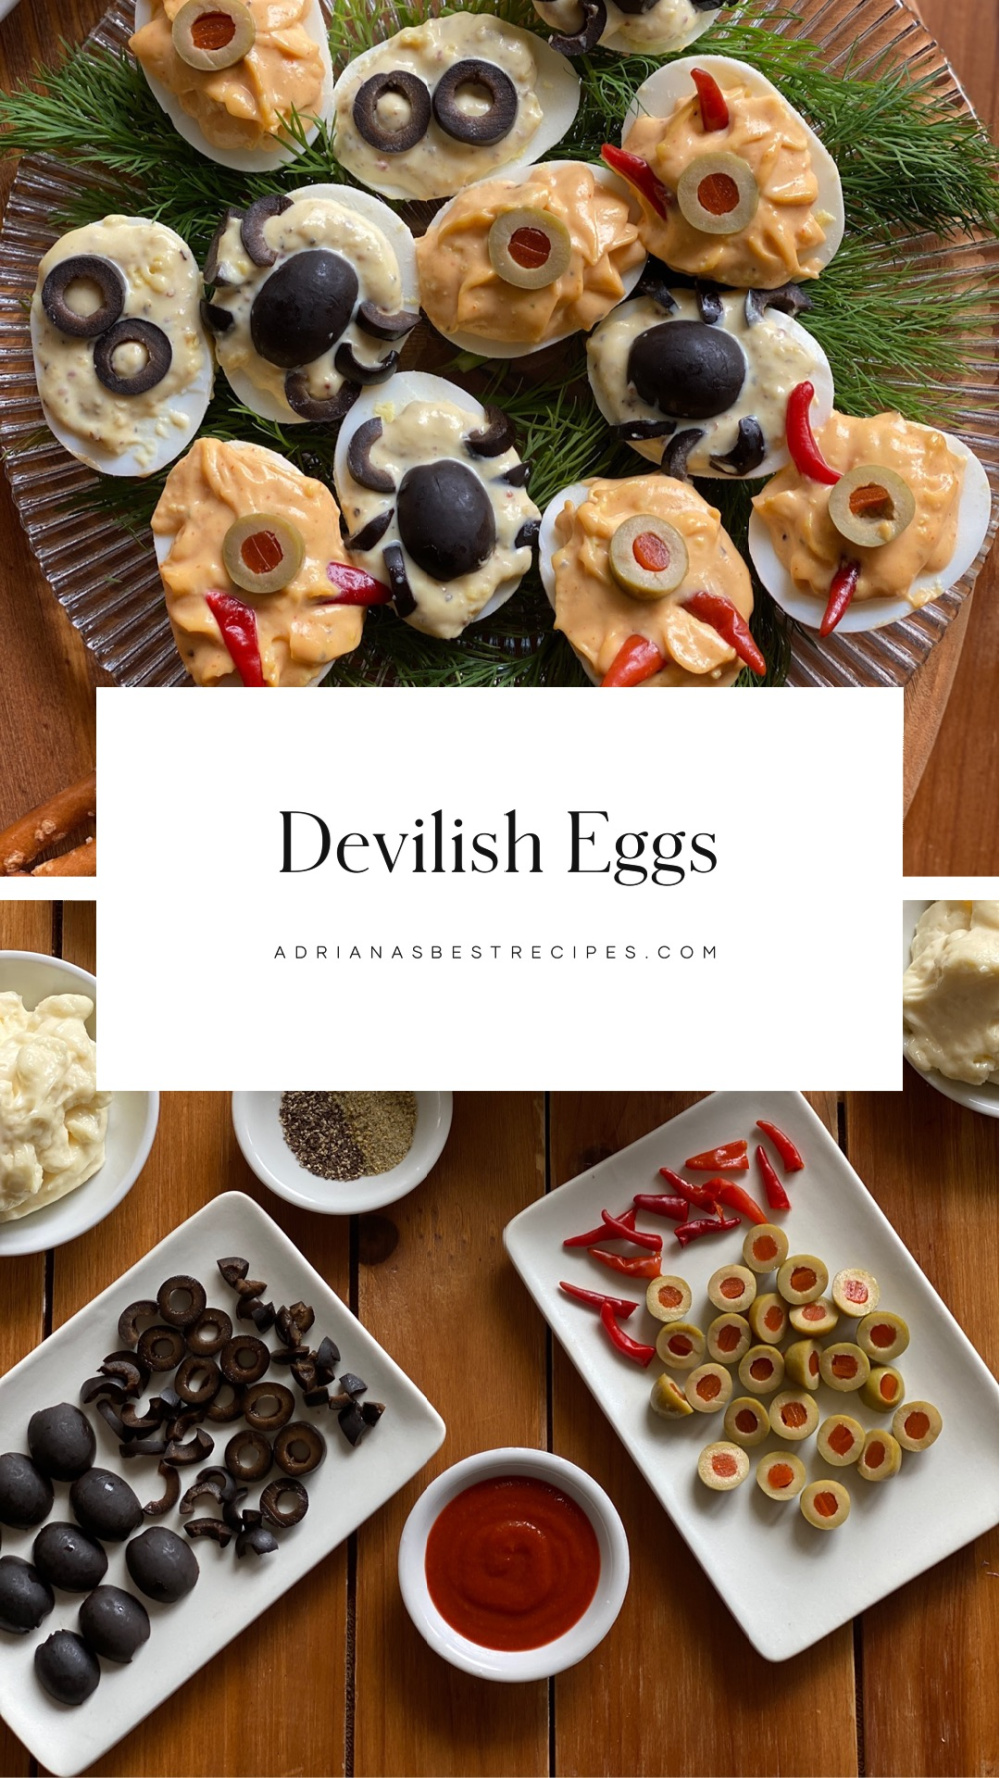 Devilish eggs garnished with olives and peppers